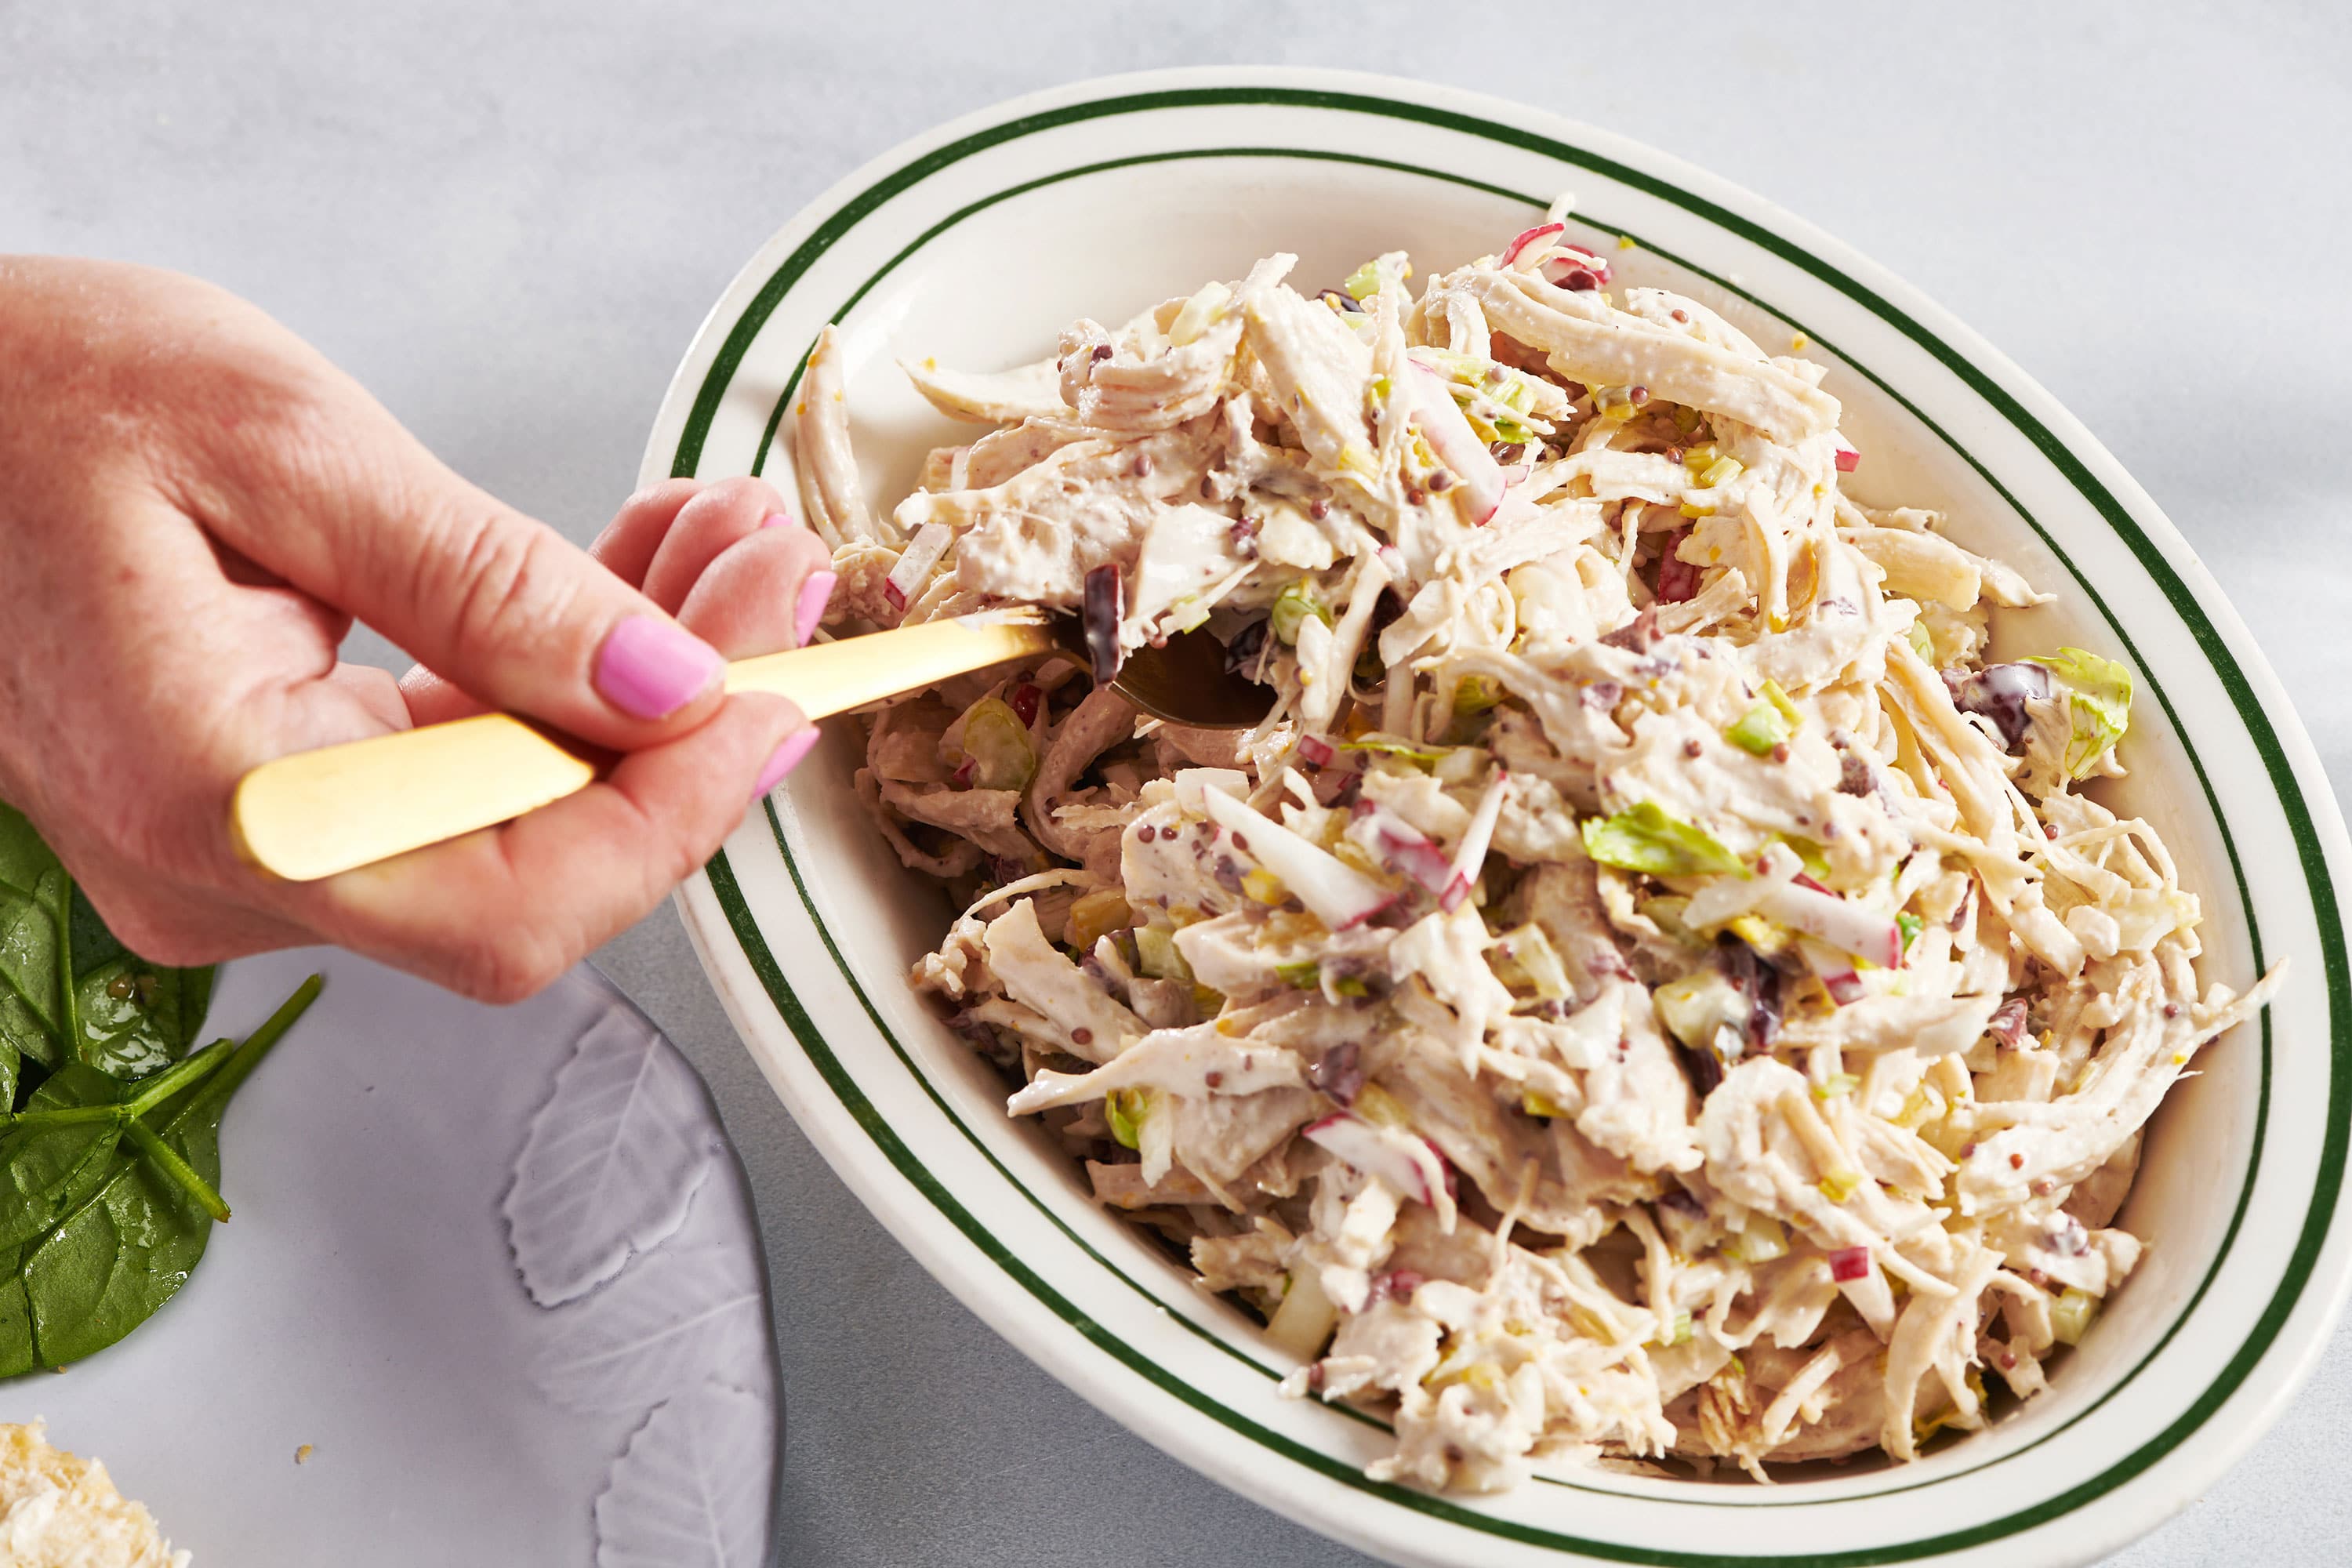 Scooping Chicken Salad out of bowl with fork.